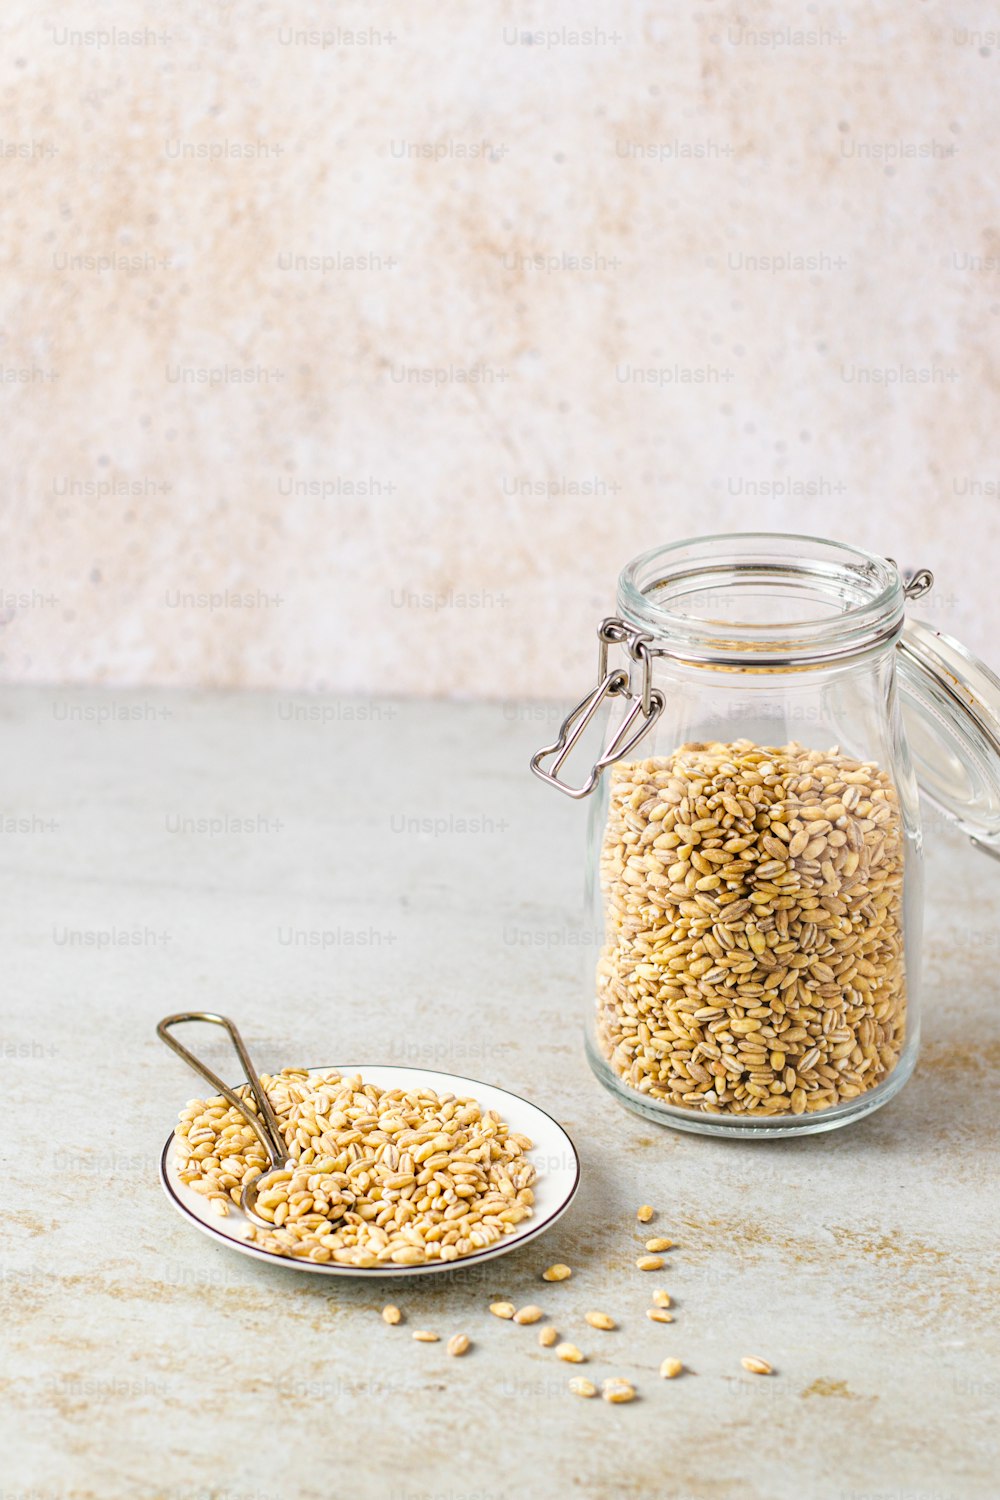 a glass jar filled with grains next to a spoon